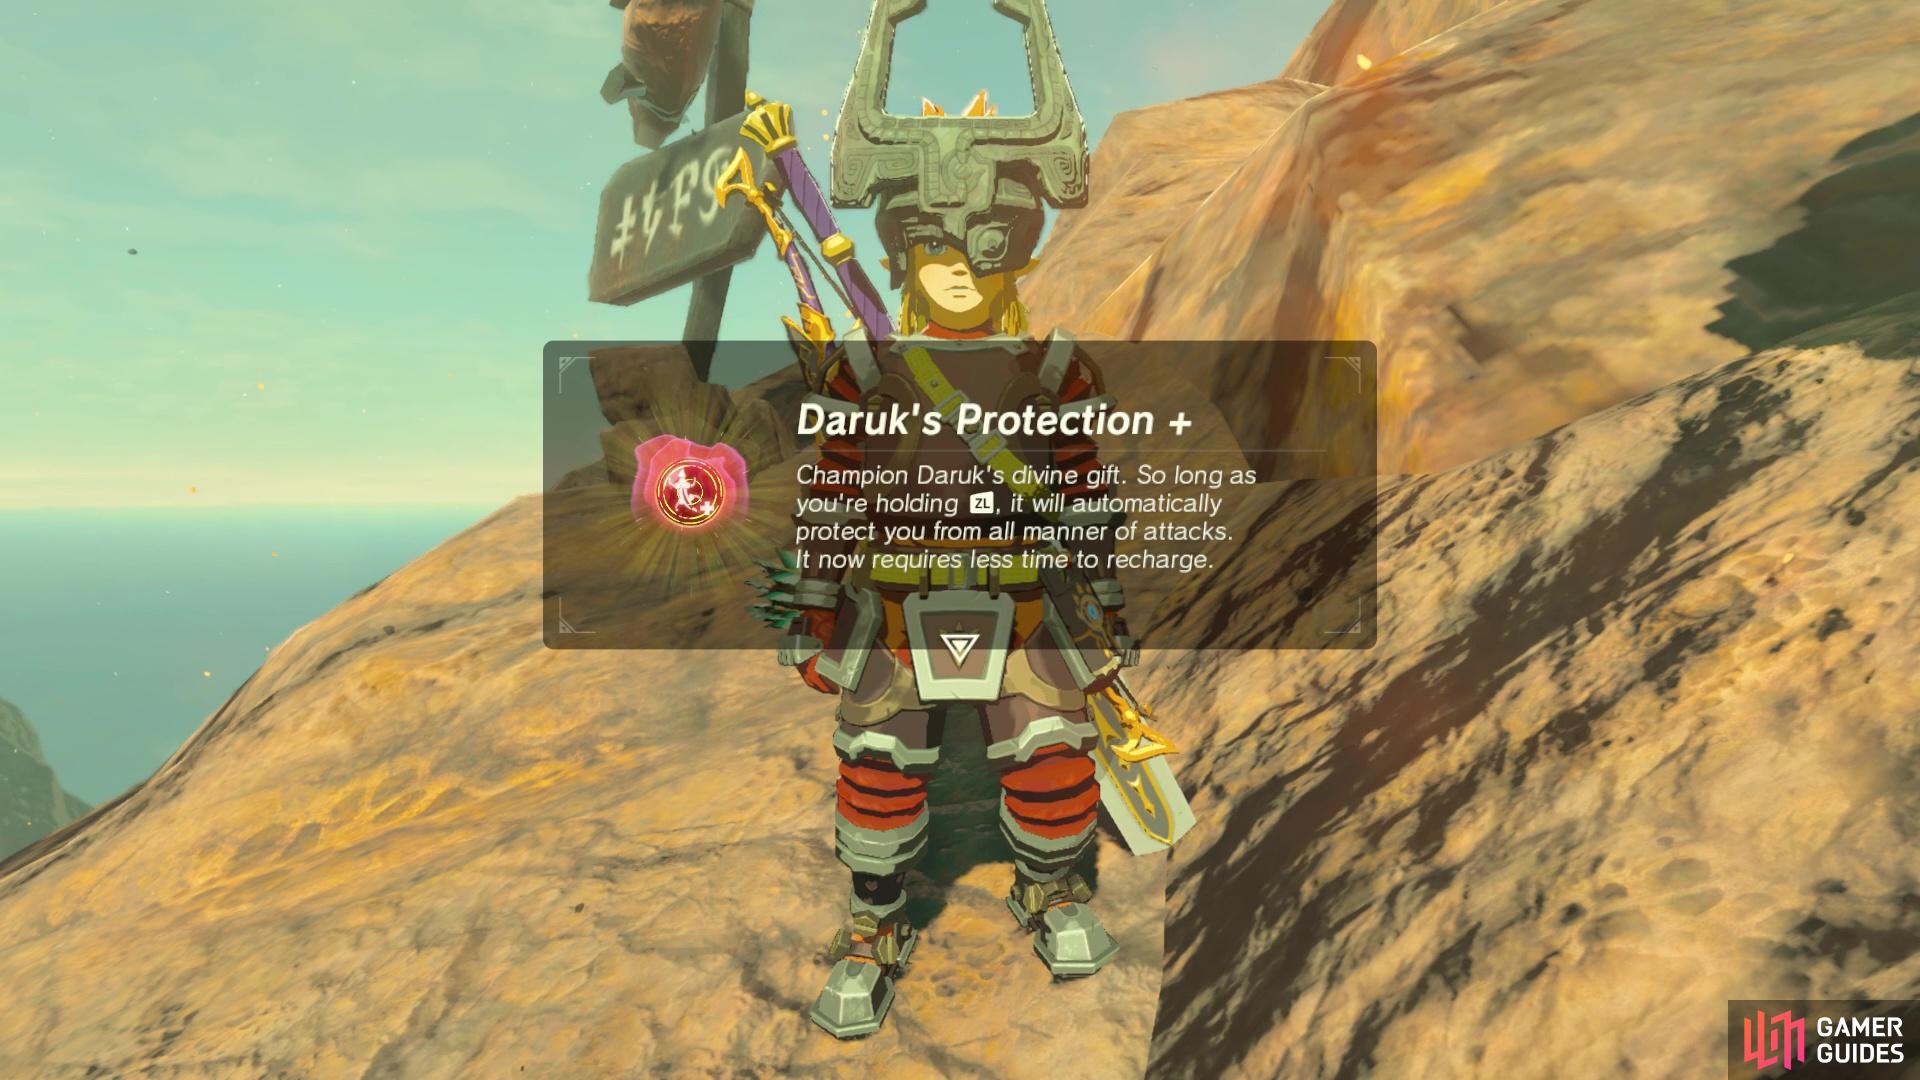 Yay! Less recharge on Daruk’s Protection.